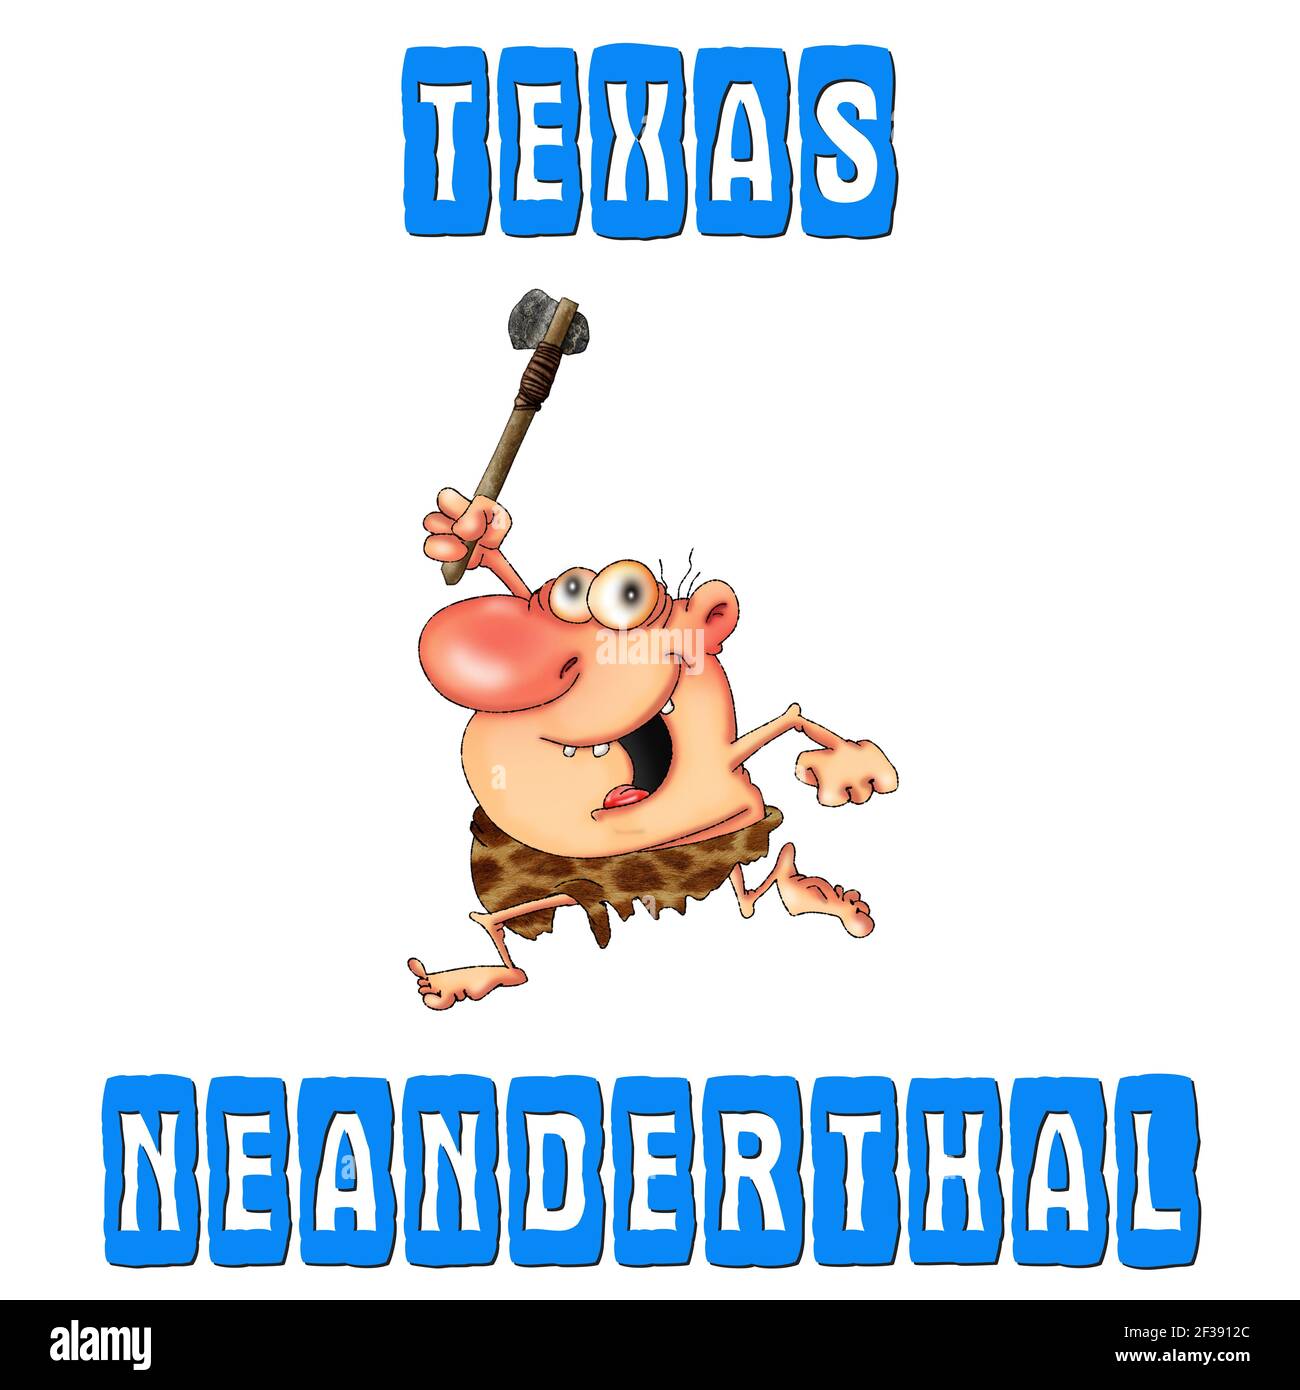 Texas neanderthal. Cartoon funny character for print and stickers.. Stock Photo